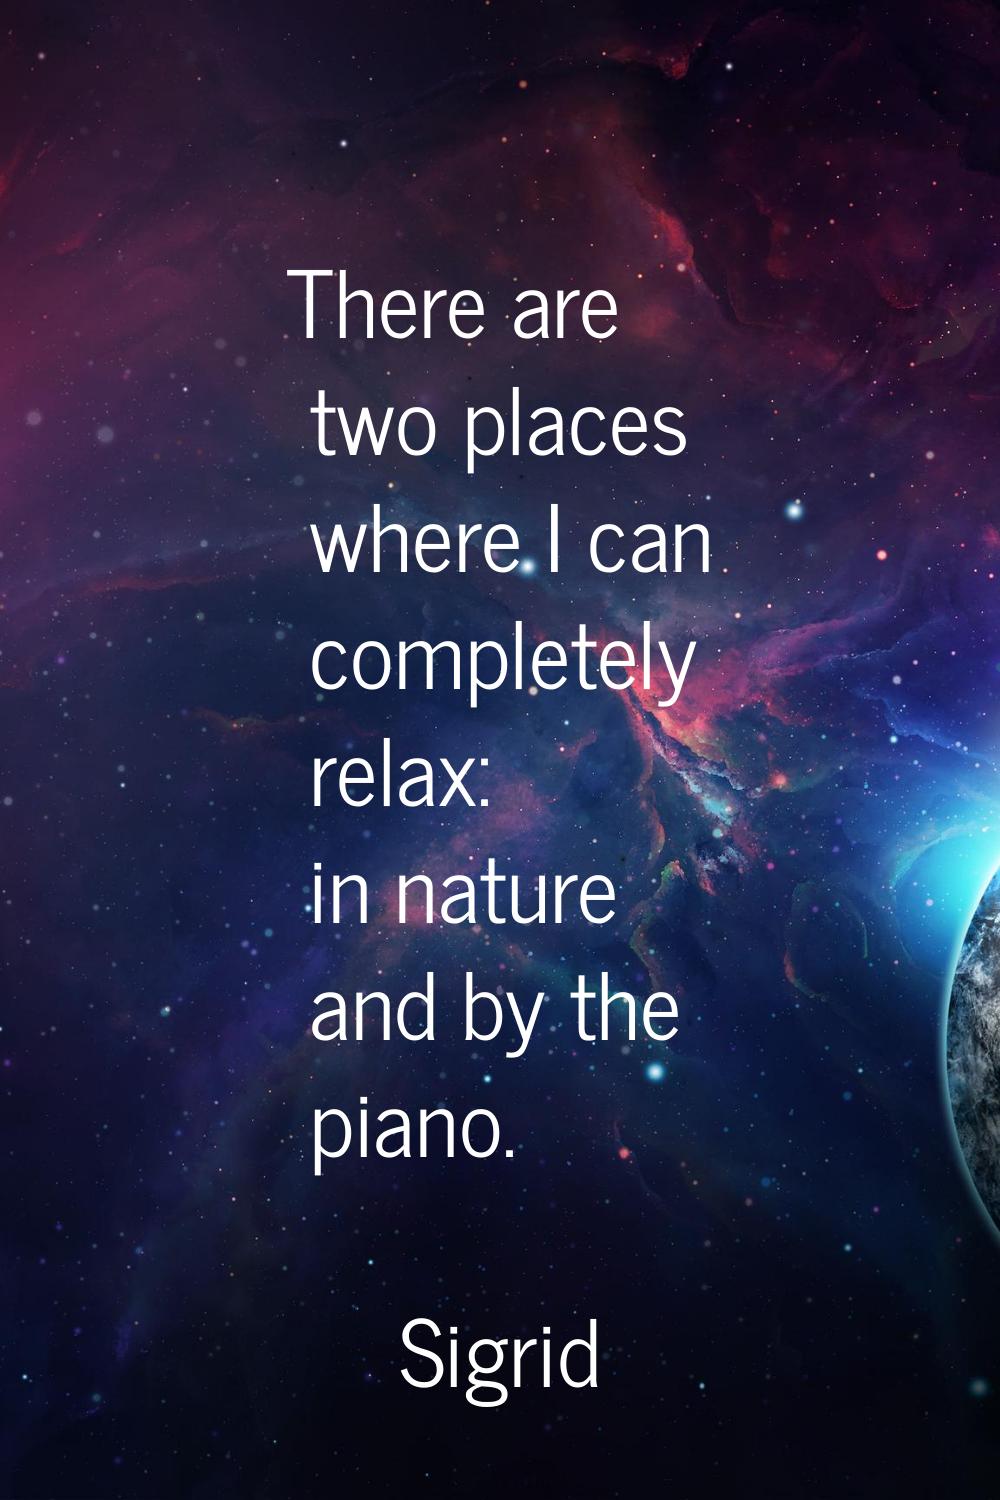 There are two places where I can completely relax: in nature and by the piano.